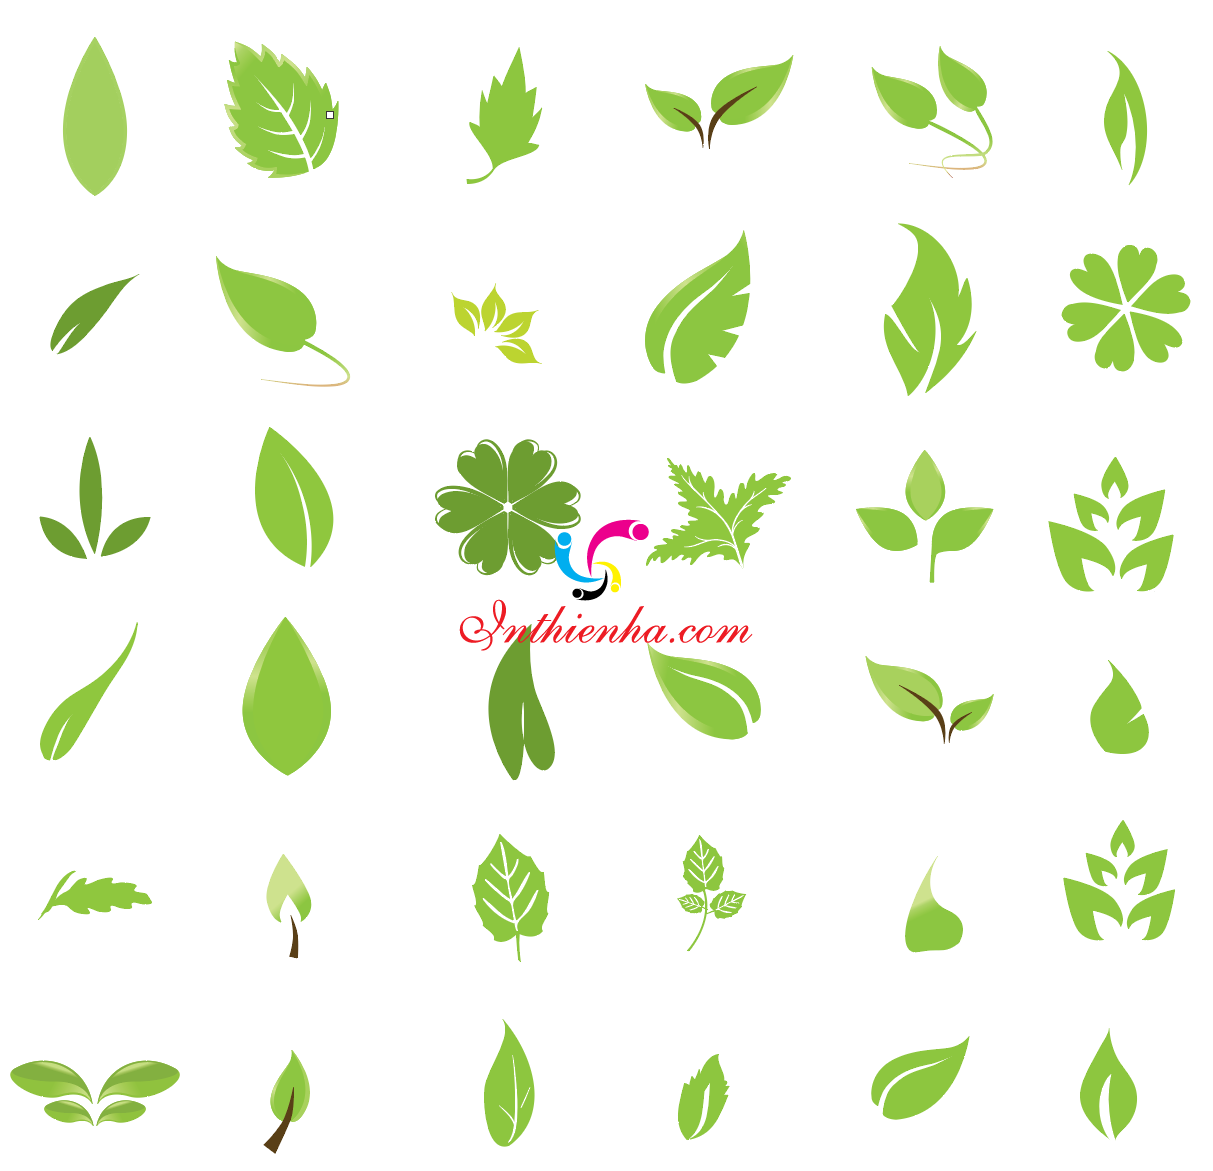 Beautiful Leaves Image Vector, Png, PSD, AI Free Download